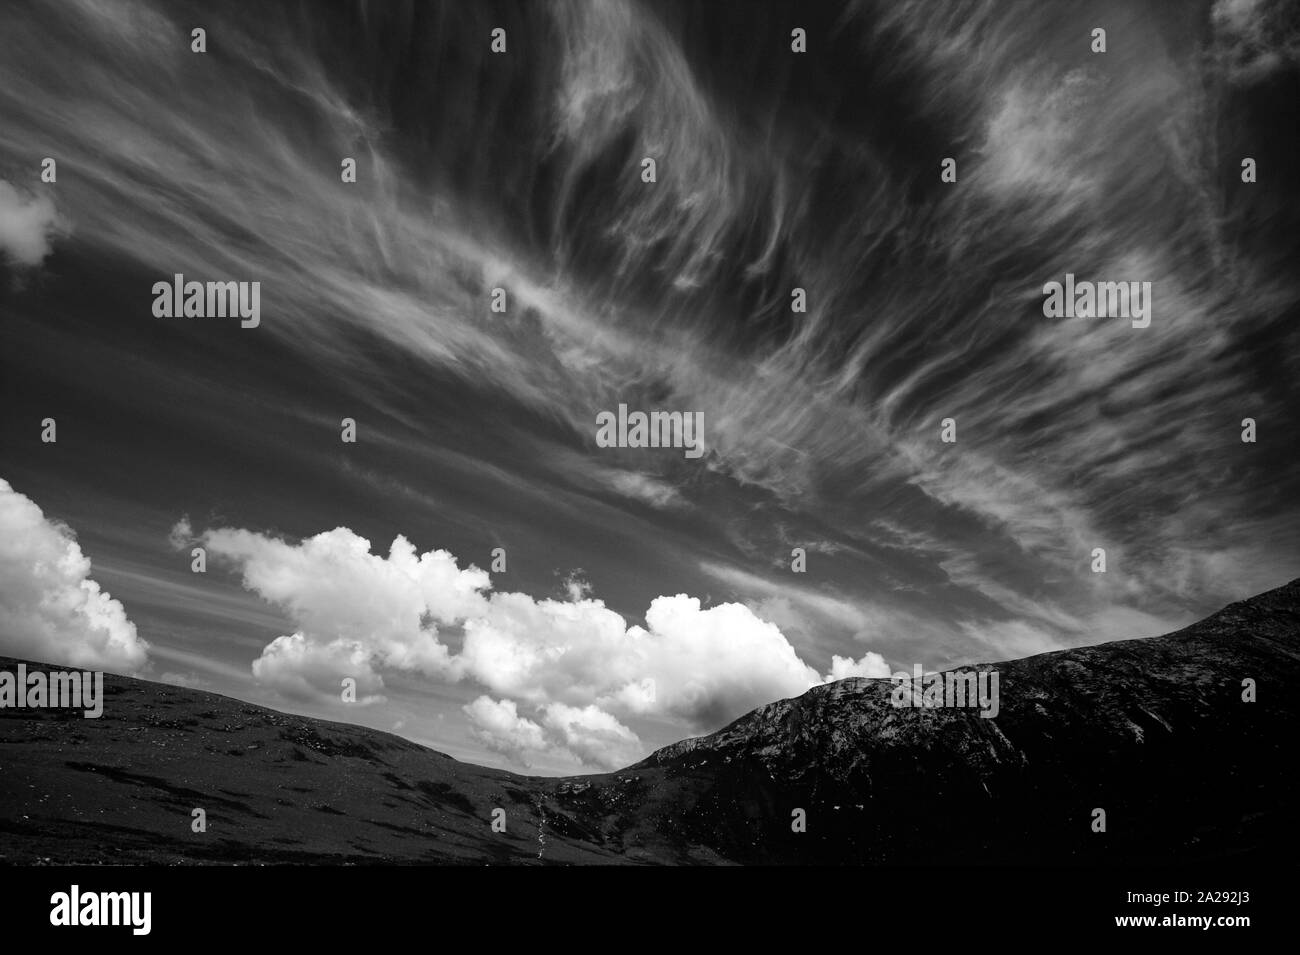 Cloud patterns in the sky at Coire Fhionn Lochan, Arran, West Coast of Scotland, UK Stock Photo